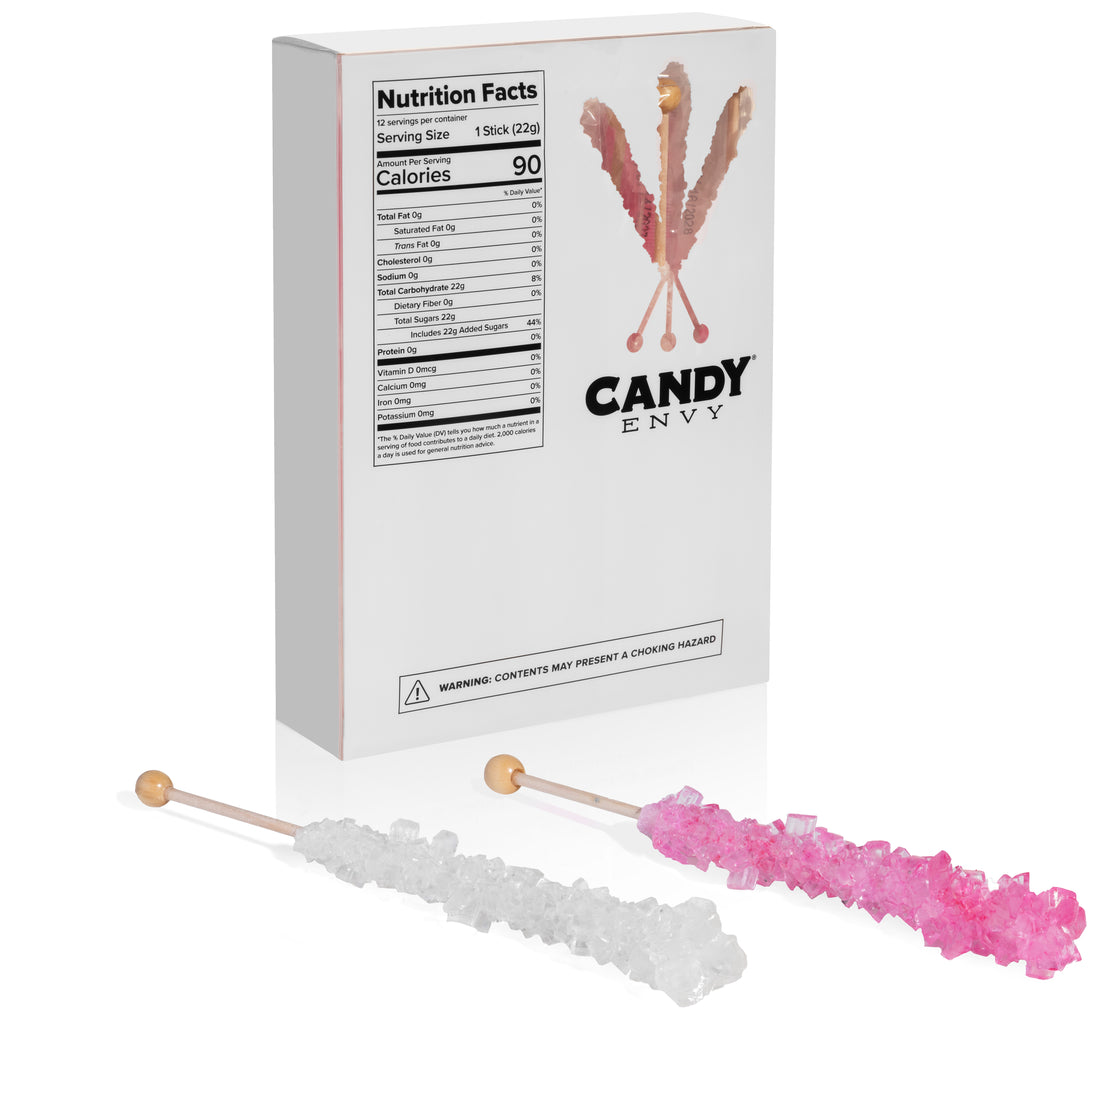 Light Pink and White Rock Candy Sugar Sticks - Cherry and Original Sugar Flavors